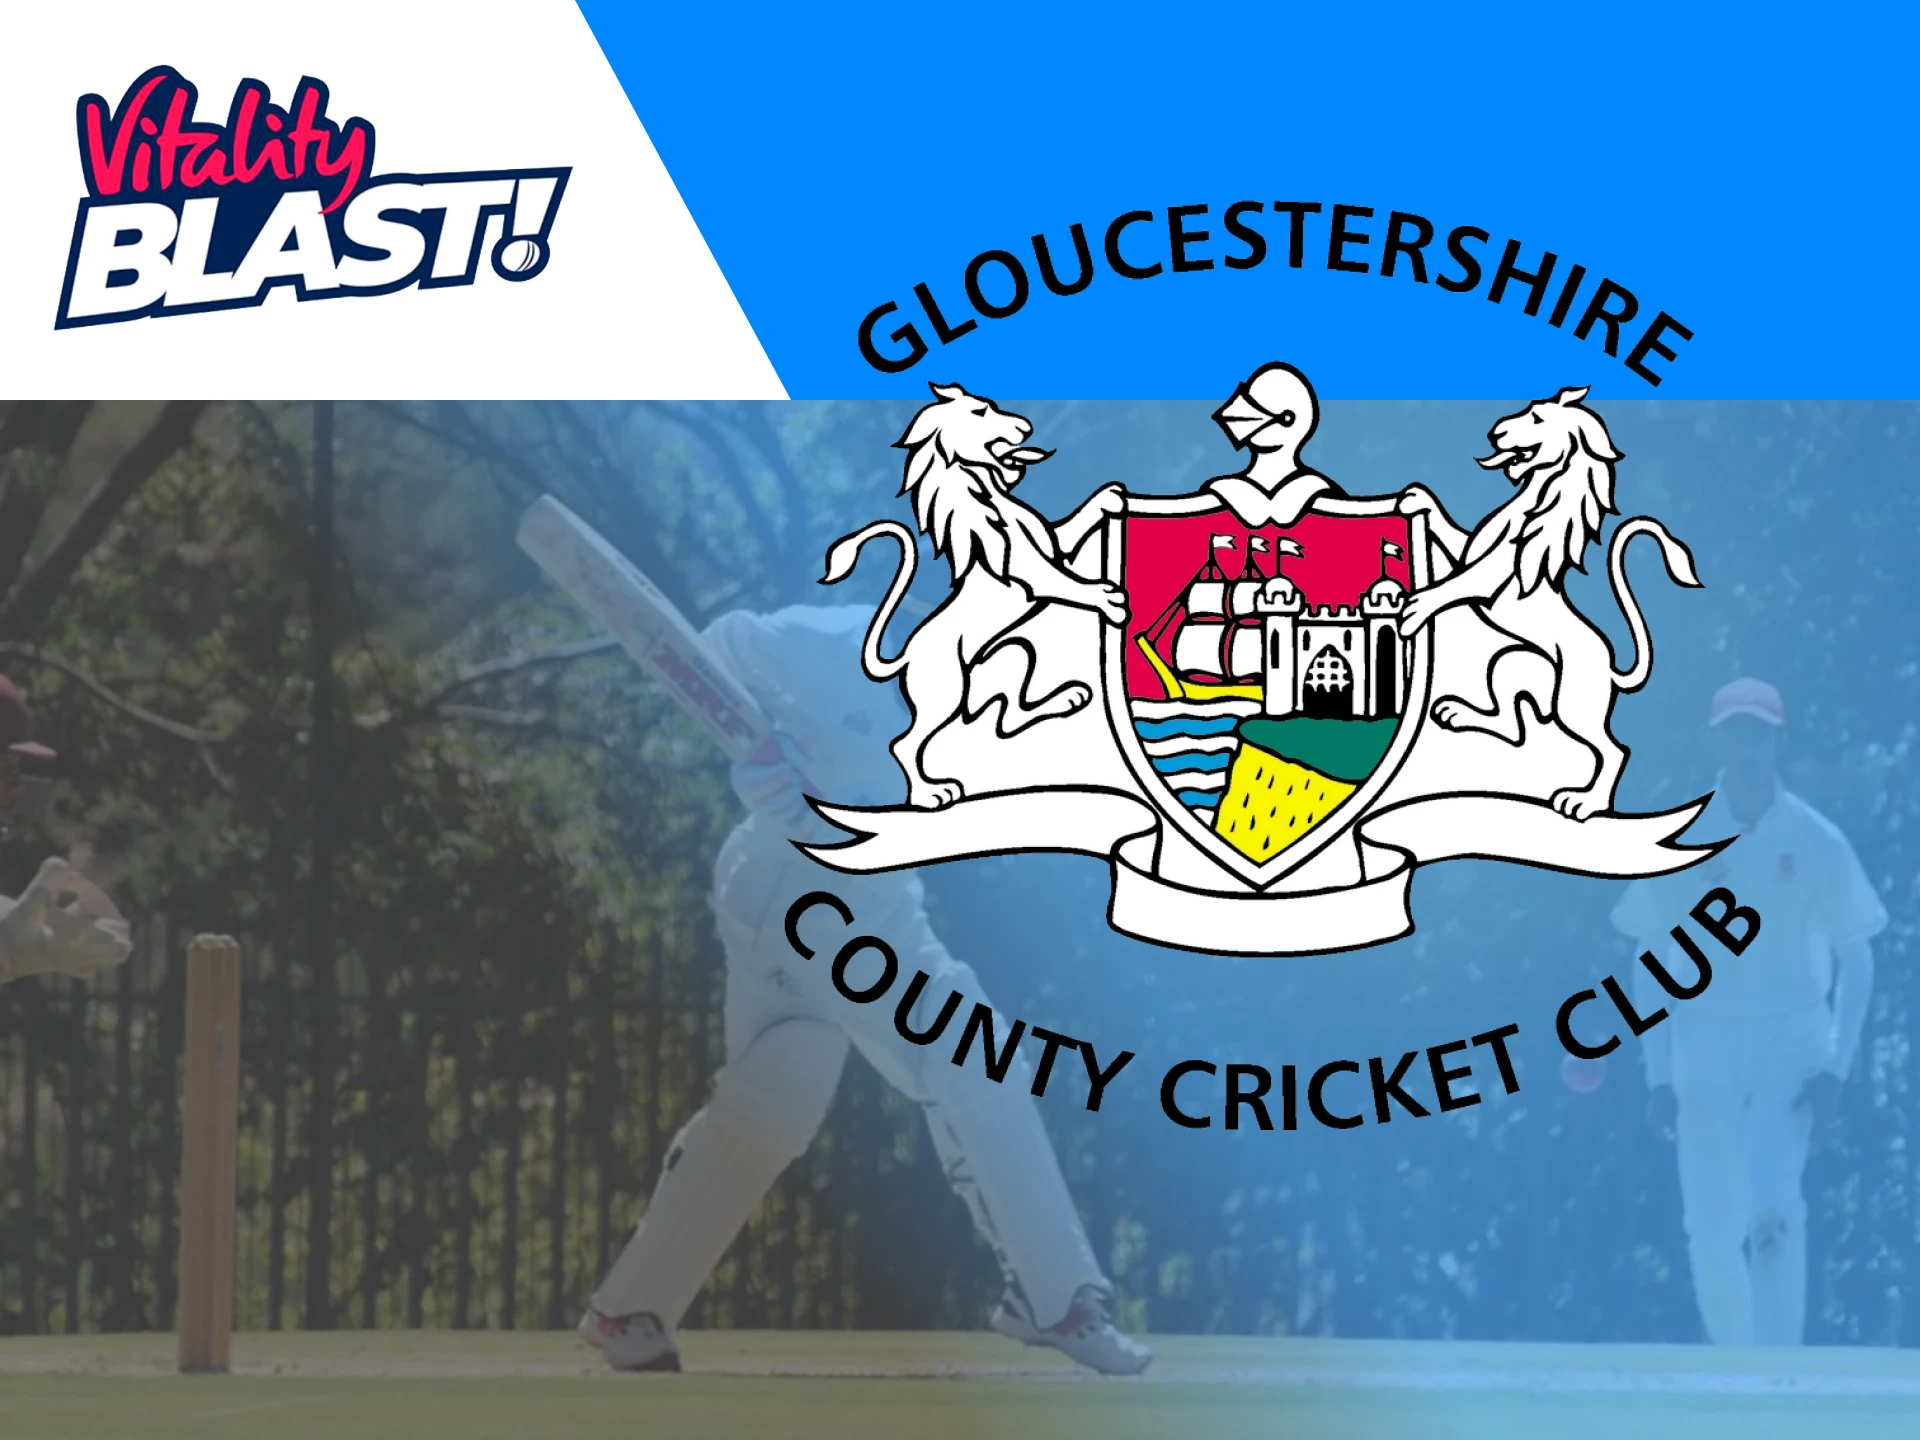 The Gloucestershire team participates in every premier cricket tournament in England.